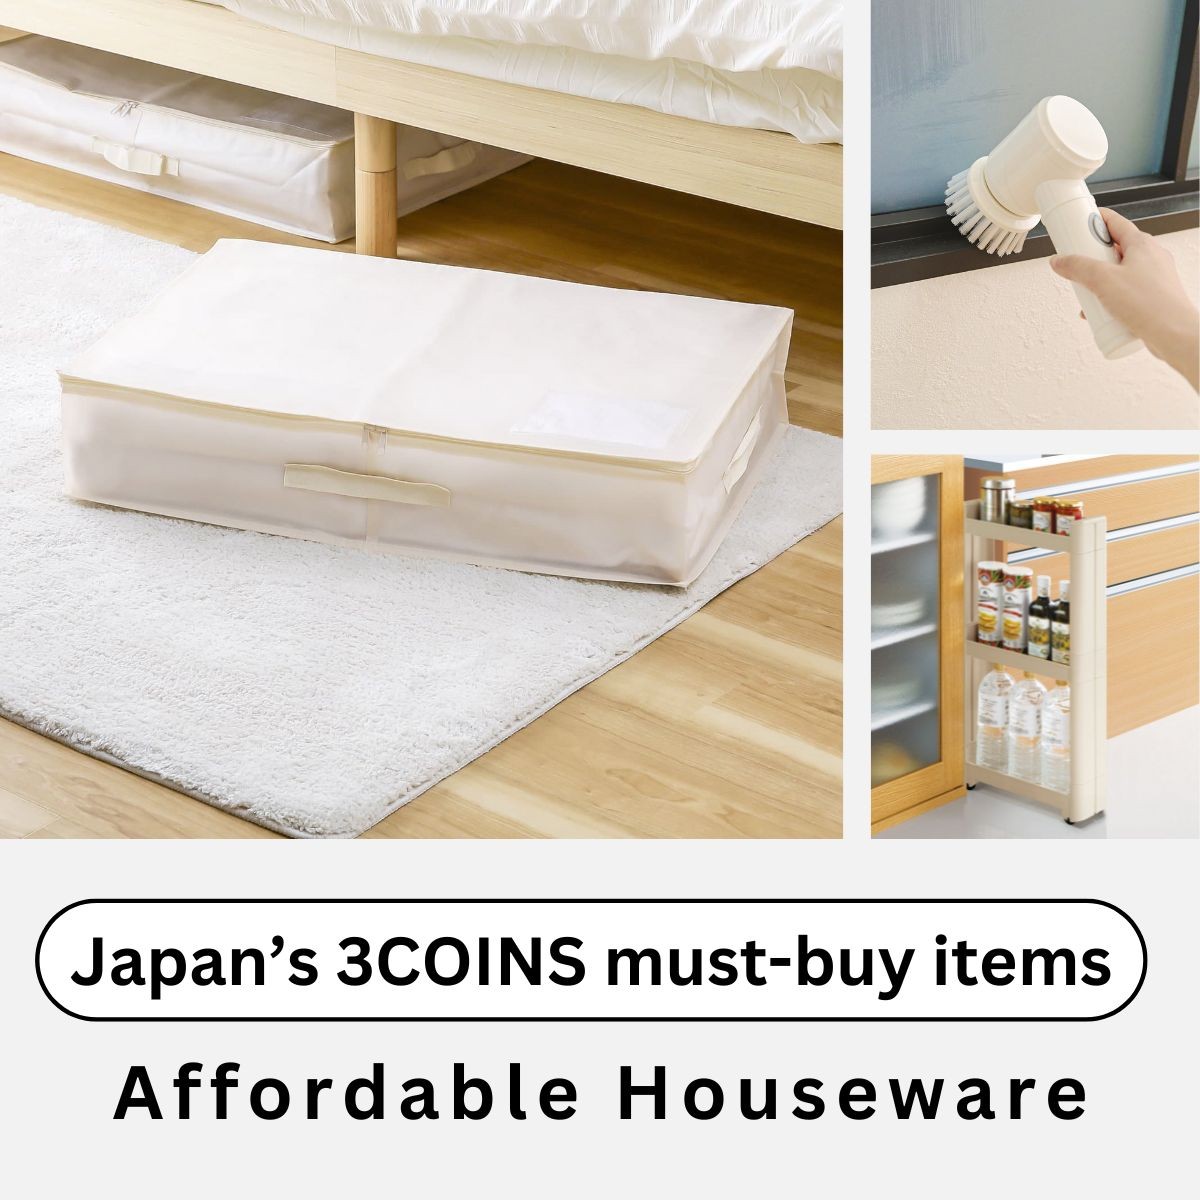 Japan’s 3COINS must-buy items